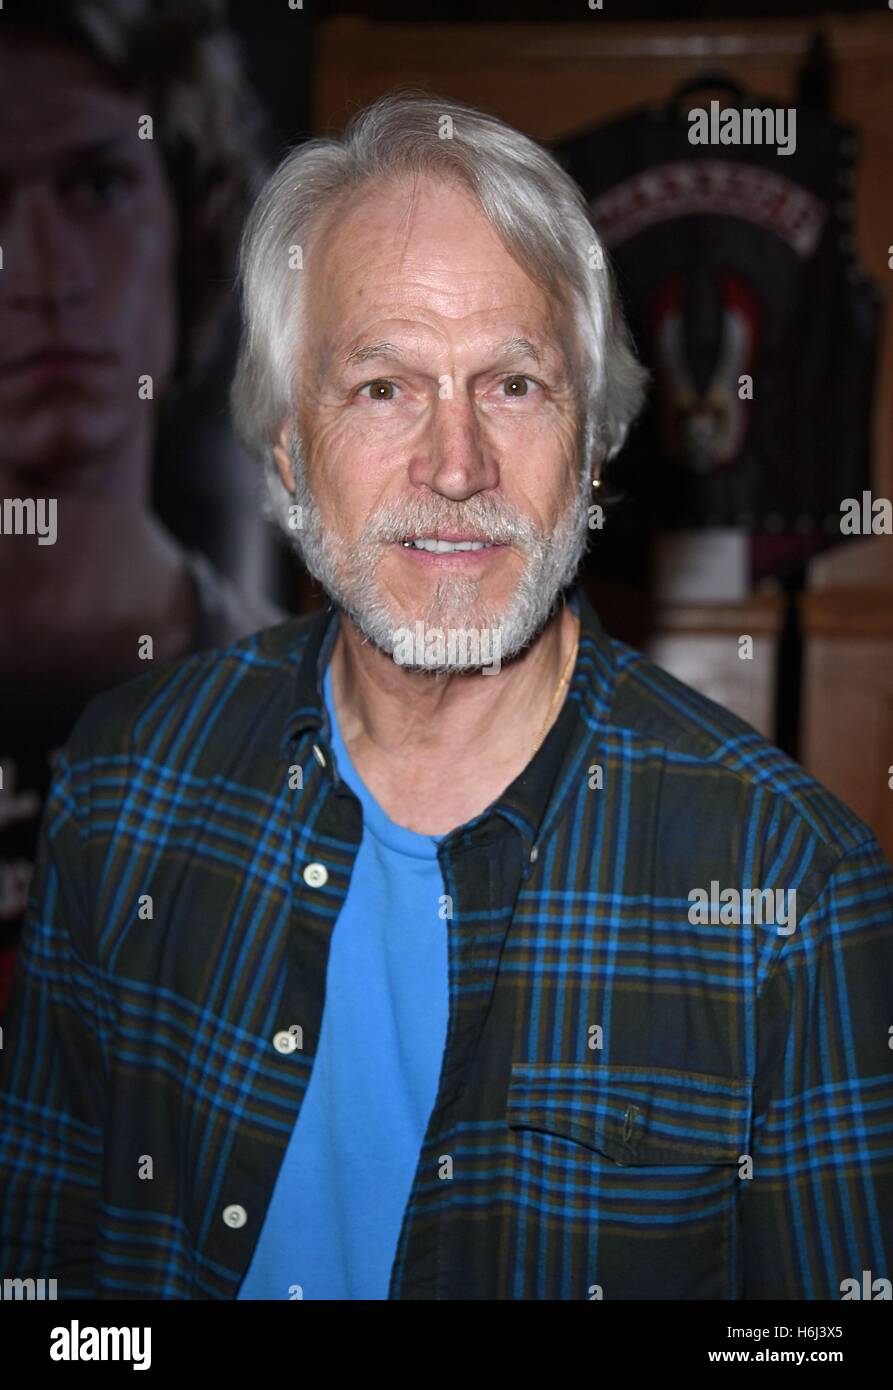 Parsippany, NJ, USA. 28th Oct, 2016. Michael Beck in attendance for Chiller Theatre Expo, Sheraton Parsippany Hotel, Parsippany, NJ October 28, 2016. Credit:  Derek Storm/Everett Collection/Alamy Live News Stock Photo